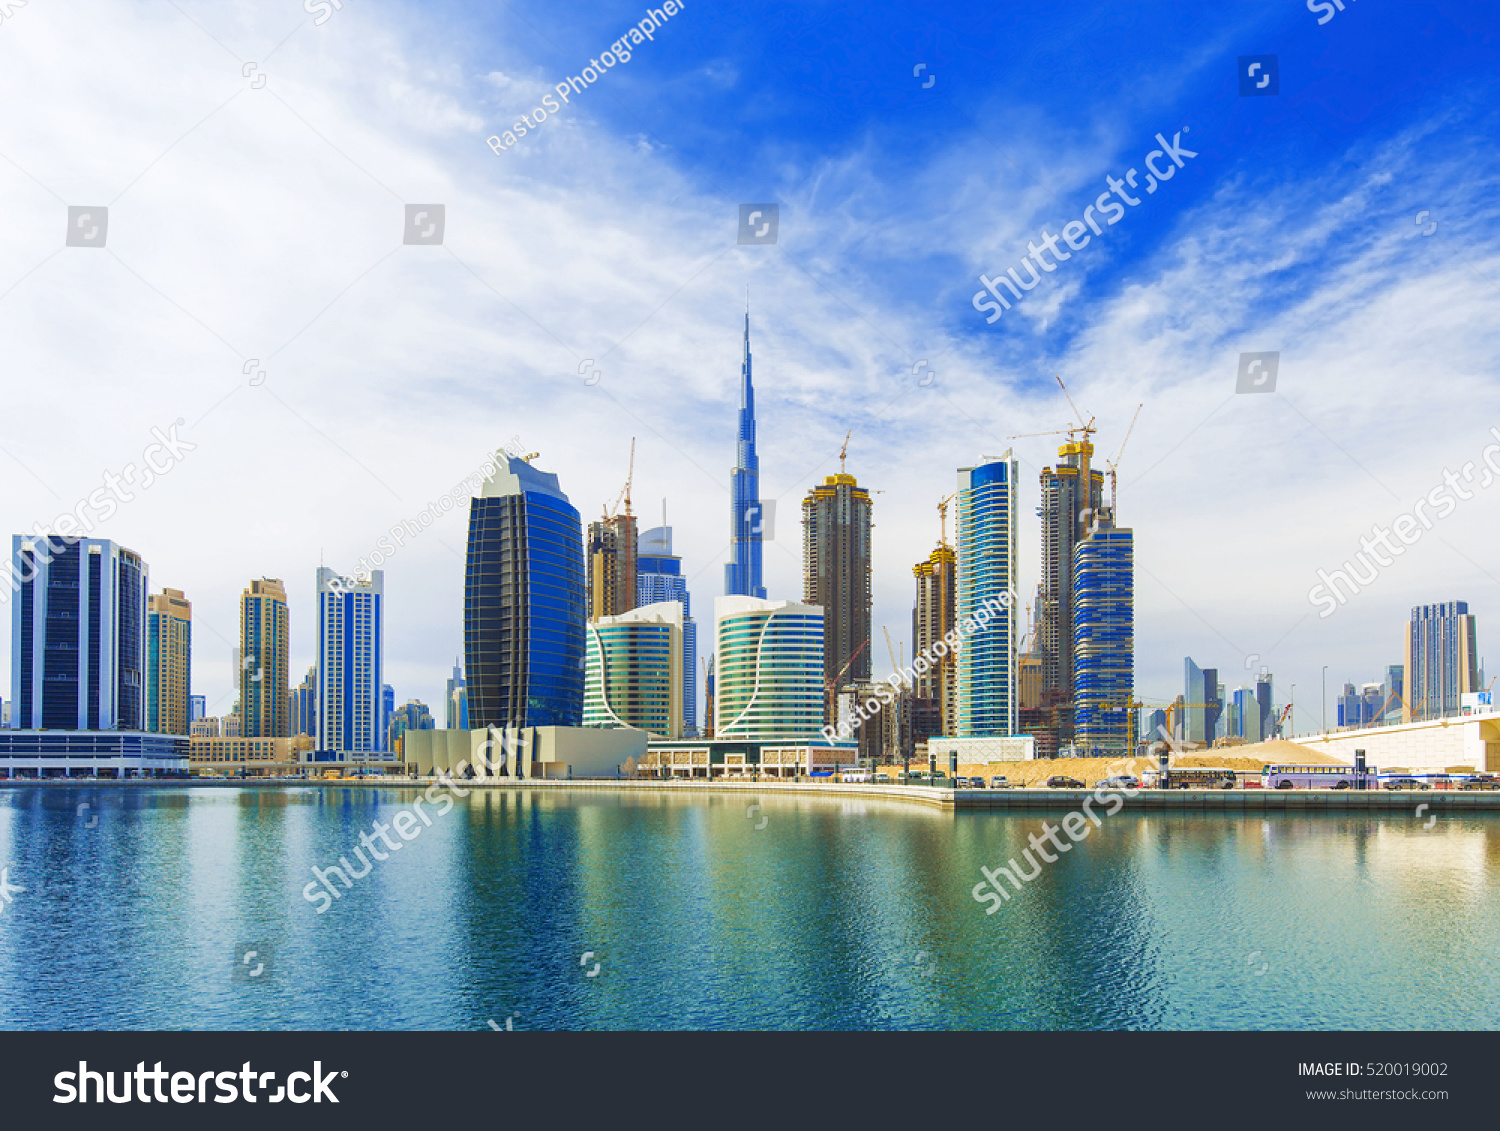 Beautiful view on Dubai modern and luxury skyscrapers in the hart of the city,Dubai,United Arab Emirates #520019002